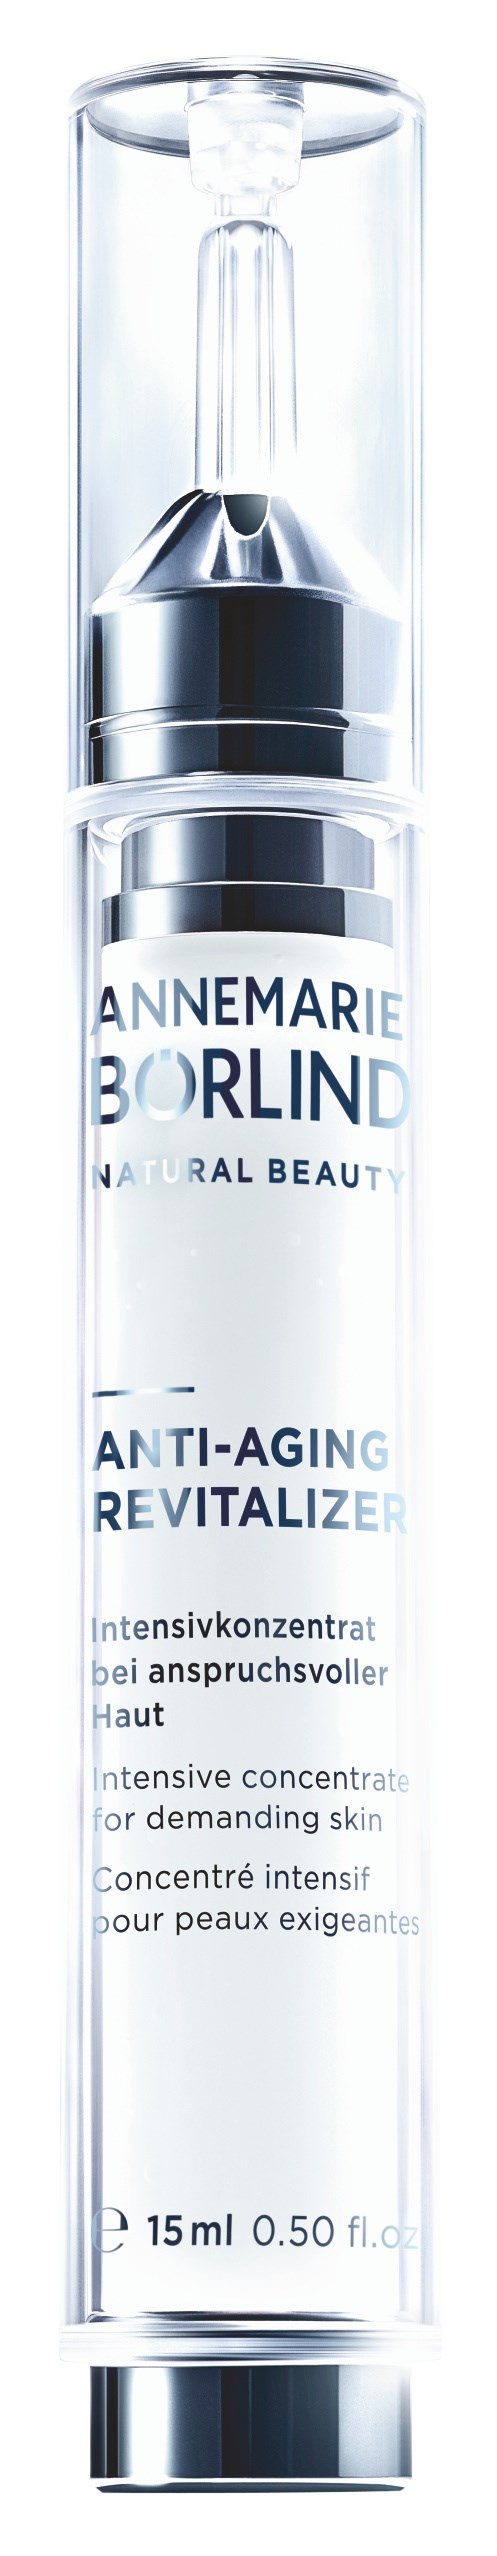 Beauty Specials Anti-Aging Revitalizer